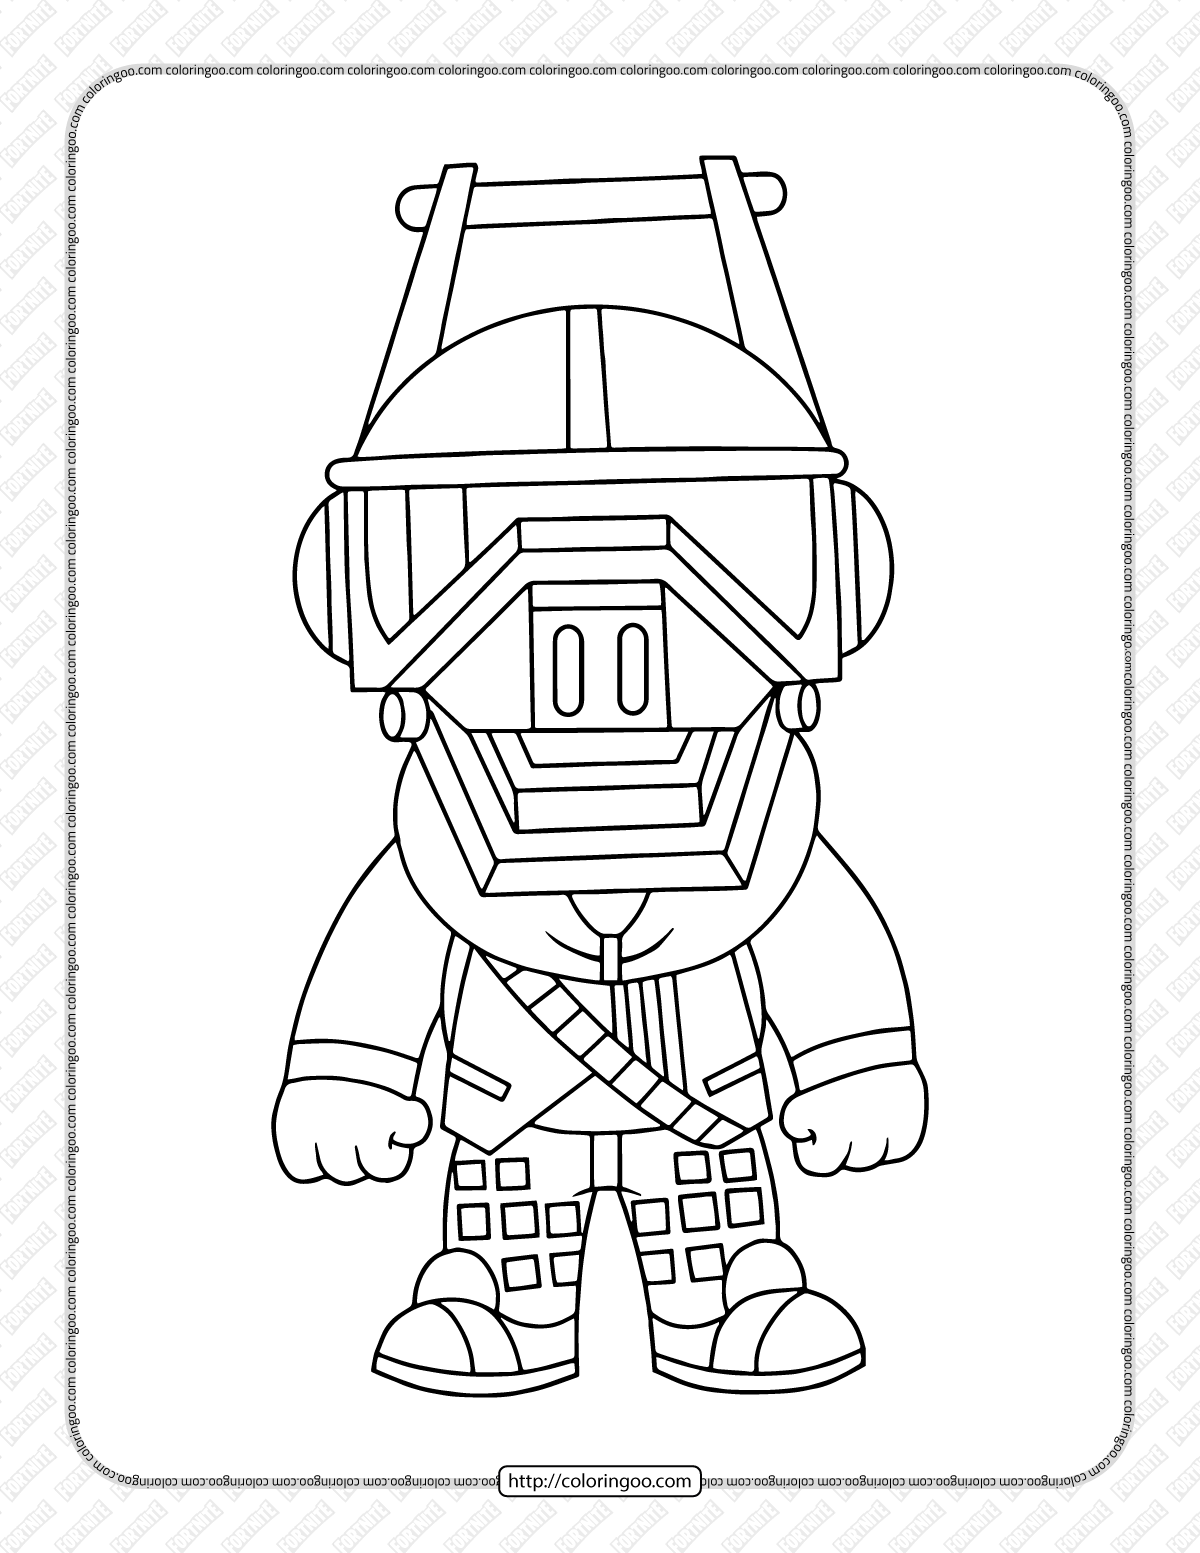 chibi fortnite coloring pages 07